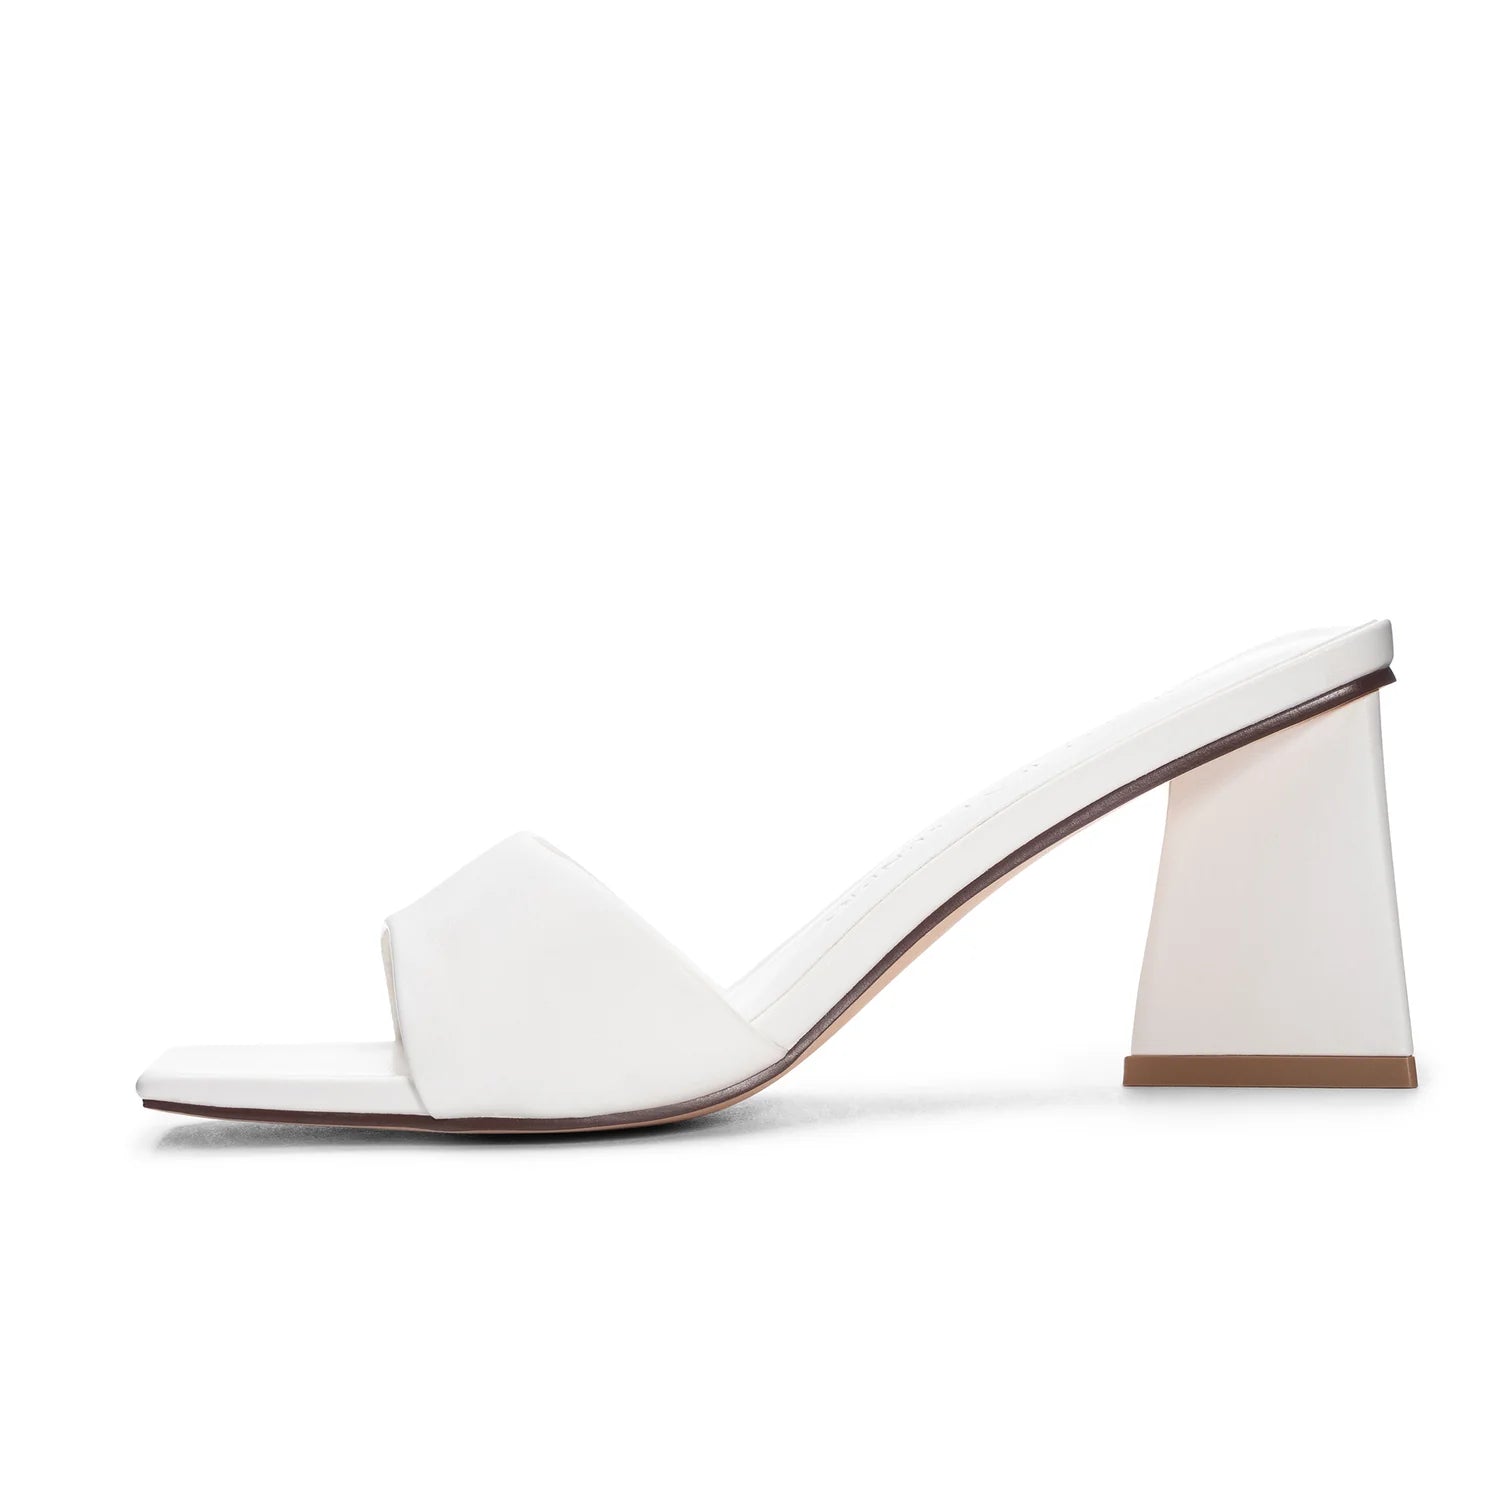 Photo of Yanda Slide Sandal in White with Triangular Block Heel Detail from Chinese Laundry available at UniKoncept in Waterloo